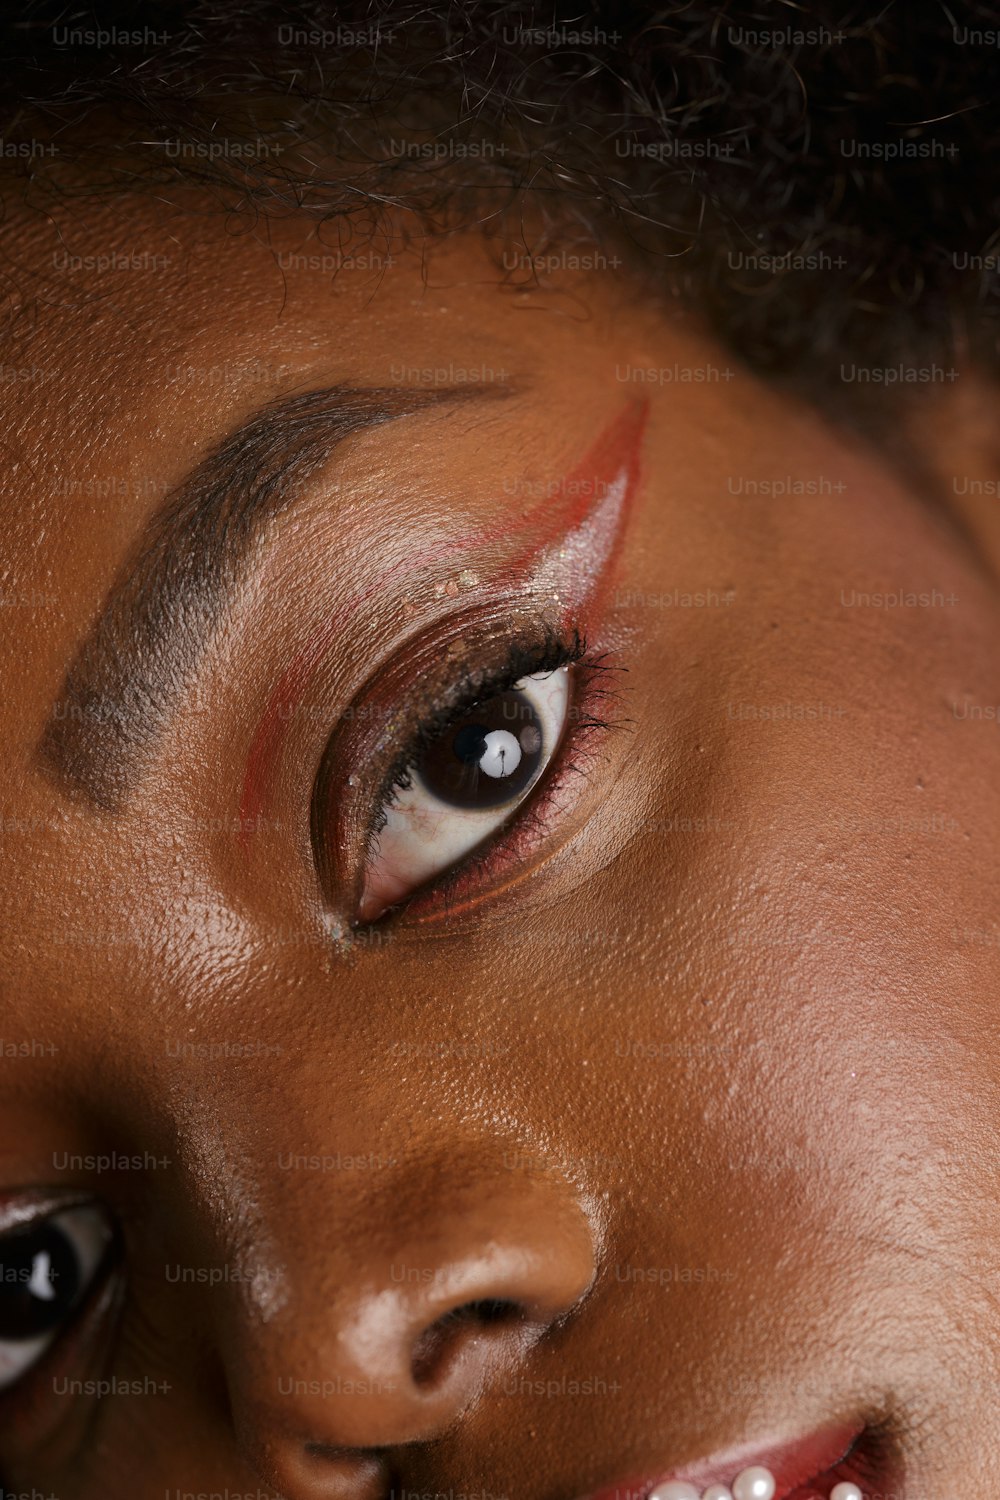 a close up of a woman's face with makeup